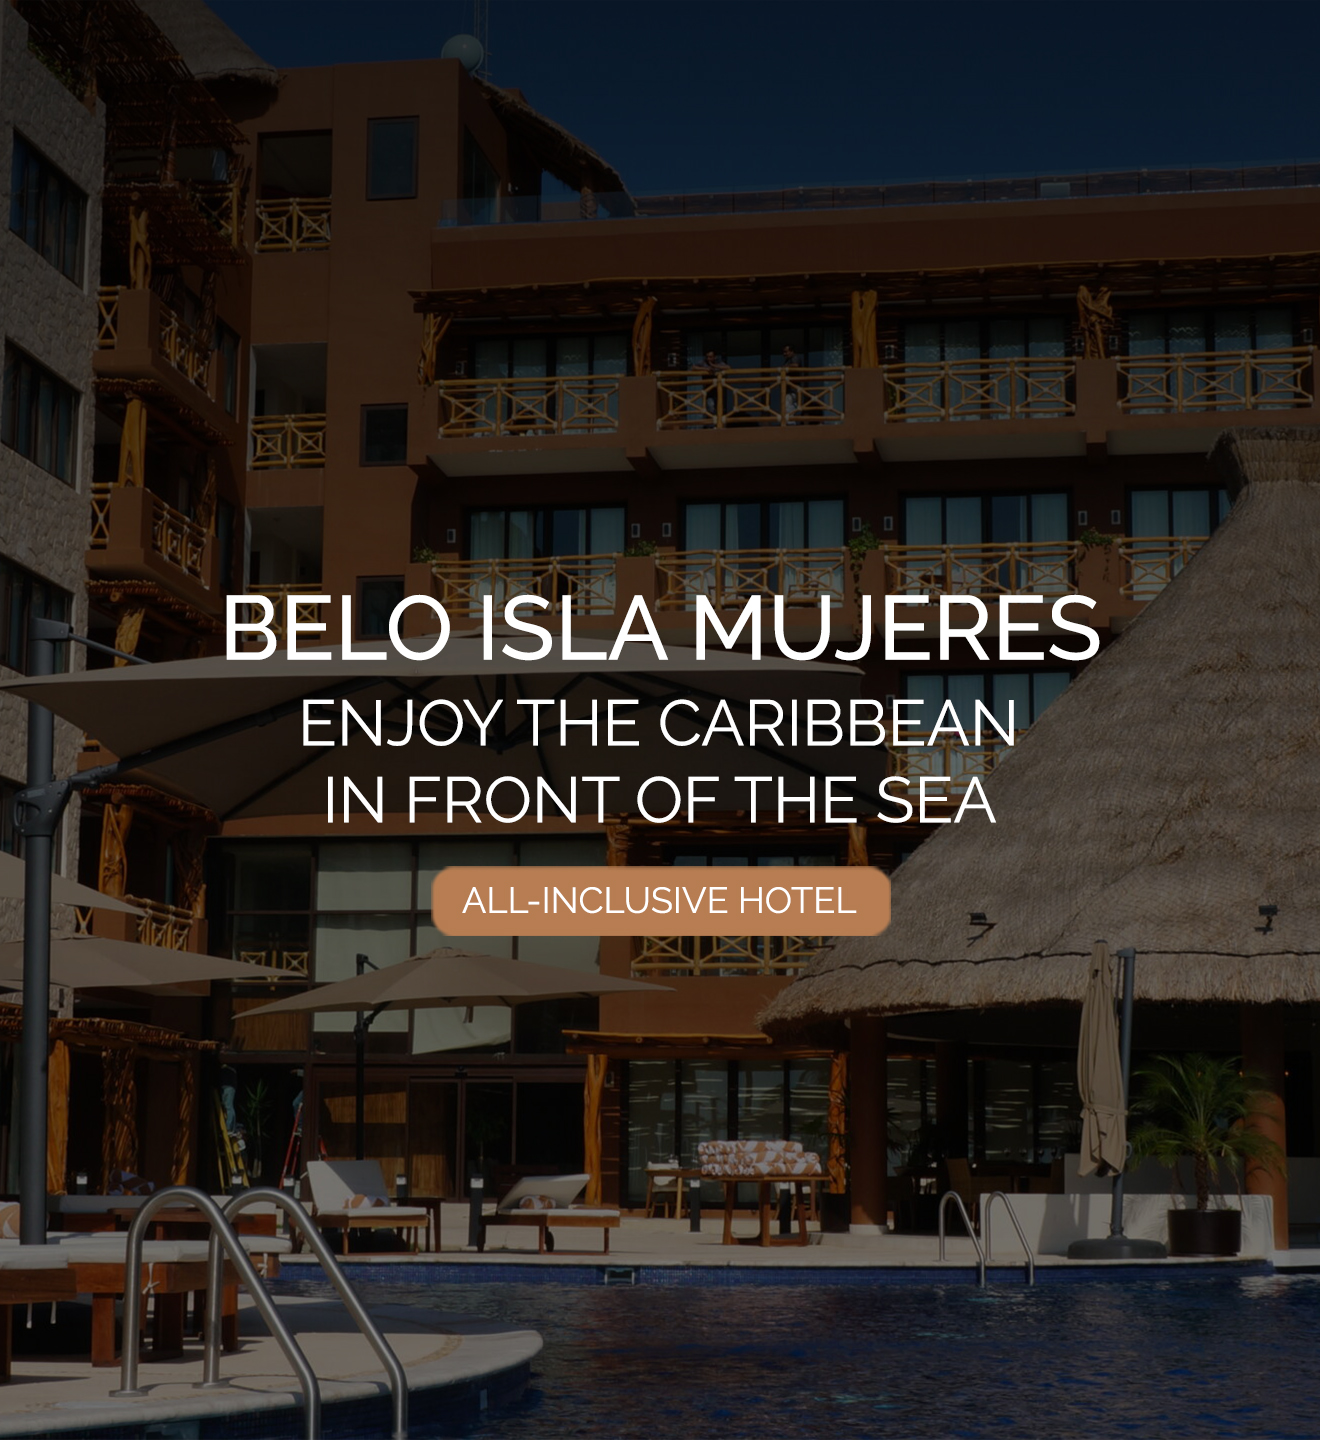 BELO ISLA MUJERES ENJOY THE CARIBBEAN IN FRONT OF THE SEA